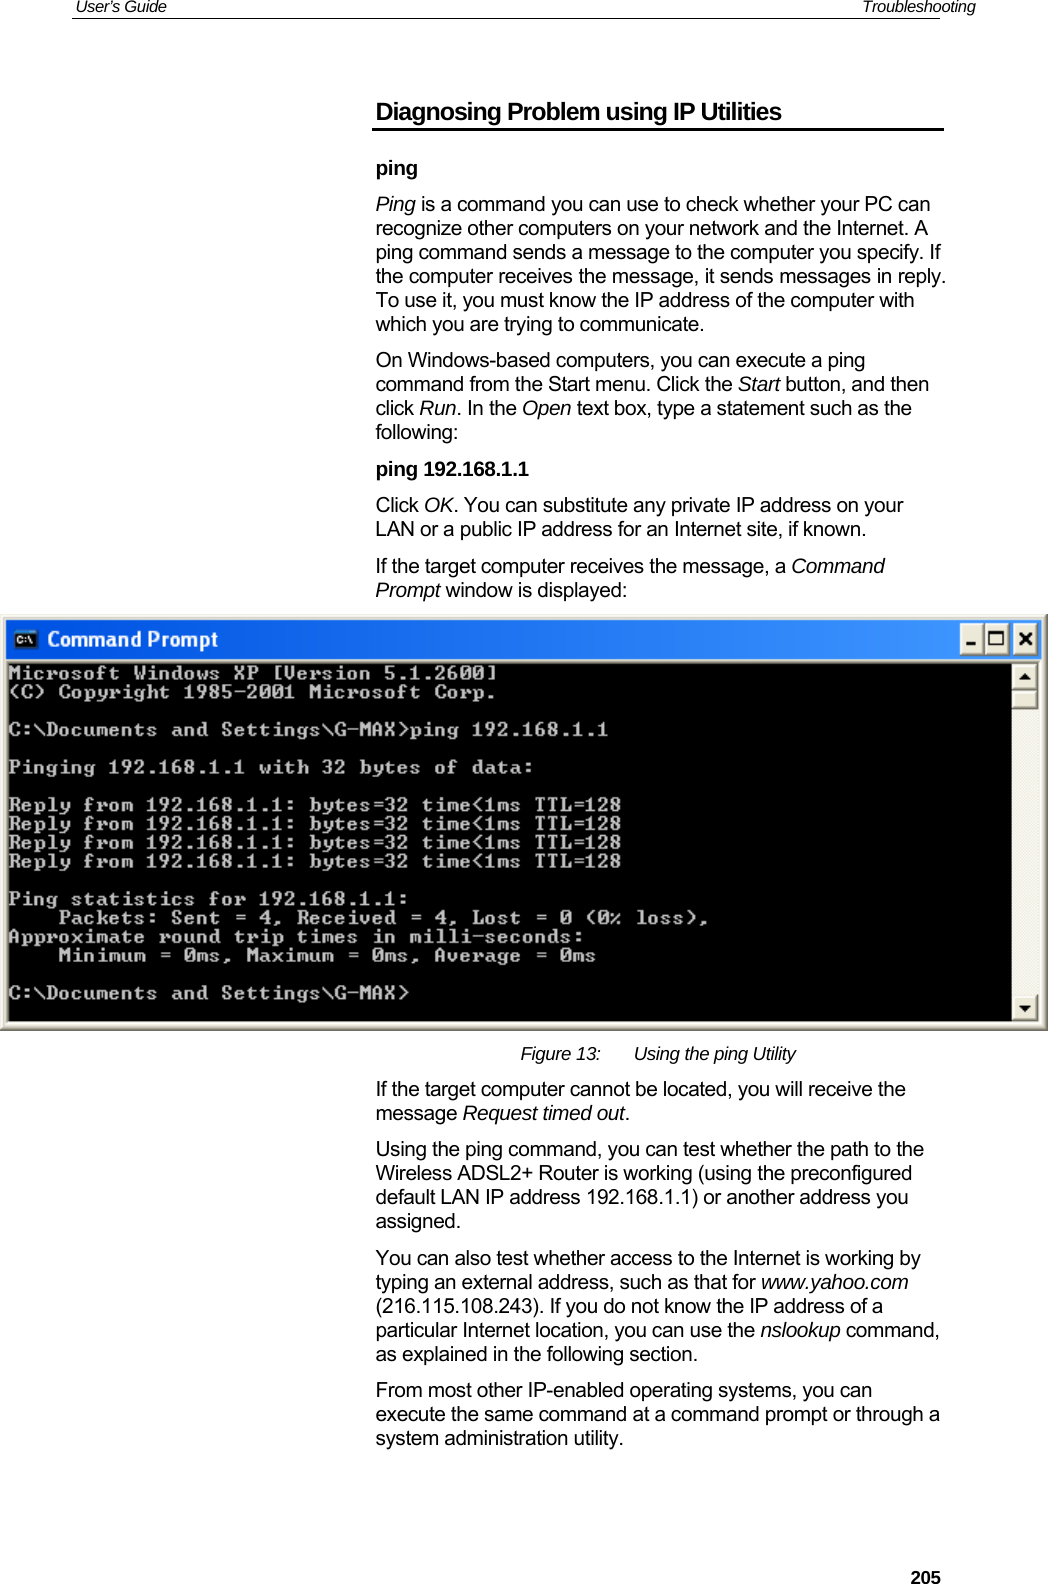 User’s Guide   Troubleshooting Diagnosing Problem using IP Utilities ping Ping is a command you can use to check whether your PC can recognize other computers on your network and the Internet. A ping command sends a message to the computer you specify. If the computer receives the message, it sends messages in reply. To use it, you must know the IP address of the computer with which you are trying to communicate.  On Windows-based computers, you can execute a ping command from the Start menu. Click the Start button, and then click Run. In the Open text box, type a statement such as the following: ping 192.168.1.1 Click OK. You can substitute any private IP address on your LAN or a public IP address for an Internet site, if known.  If the target computer receives the message, a Command Prompt window is displayed:  Figure 13:  Using the ping Utility If the target computer cannot be located, you will receive the message Request timed out. Using the ping command, you can test whether the path to the Wireless ADSL2+ Router is working (using the preconfigured default LAN IP address 192.168.1.1) or another address you assigned. You can also test whether access to the Internet is working by typing an external address, such as that for www.yahoo.com (216.115.108.243). If you do not know the IP address of a particular Internet location, you can use the nslookup command, as explained in the following section. From most other IP-enabled operating systems, you can execute the same command at a command prompt or through a system administration utility.  205